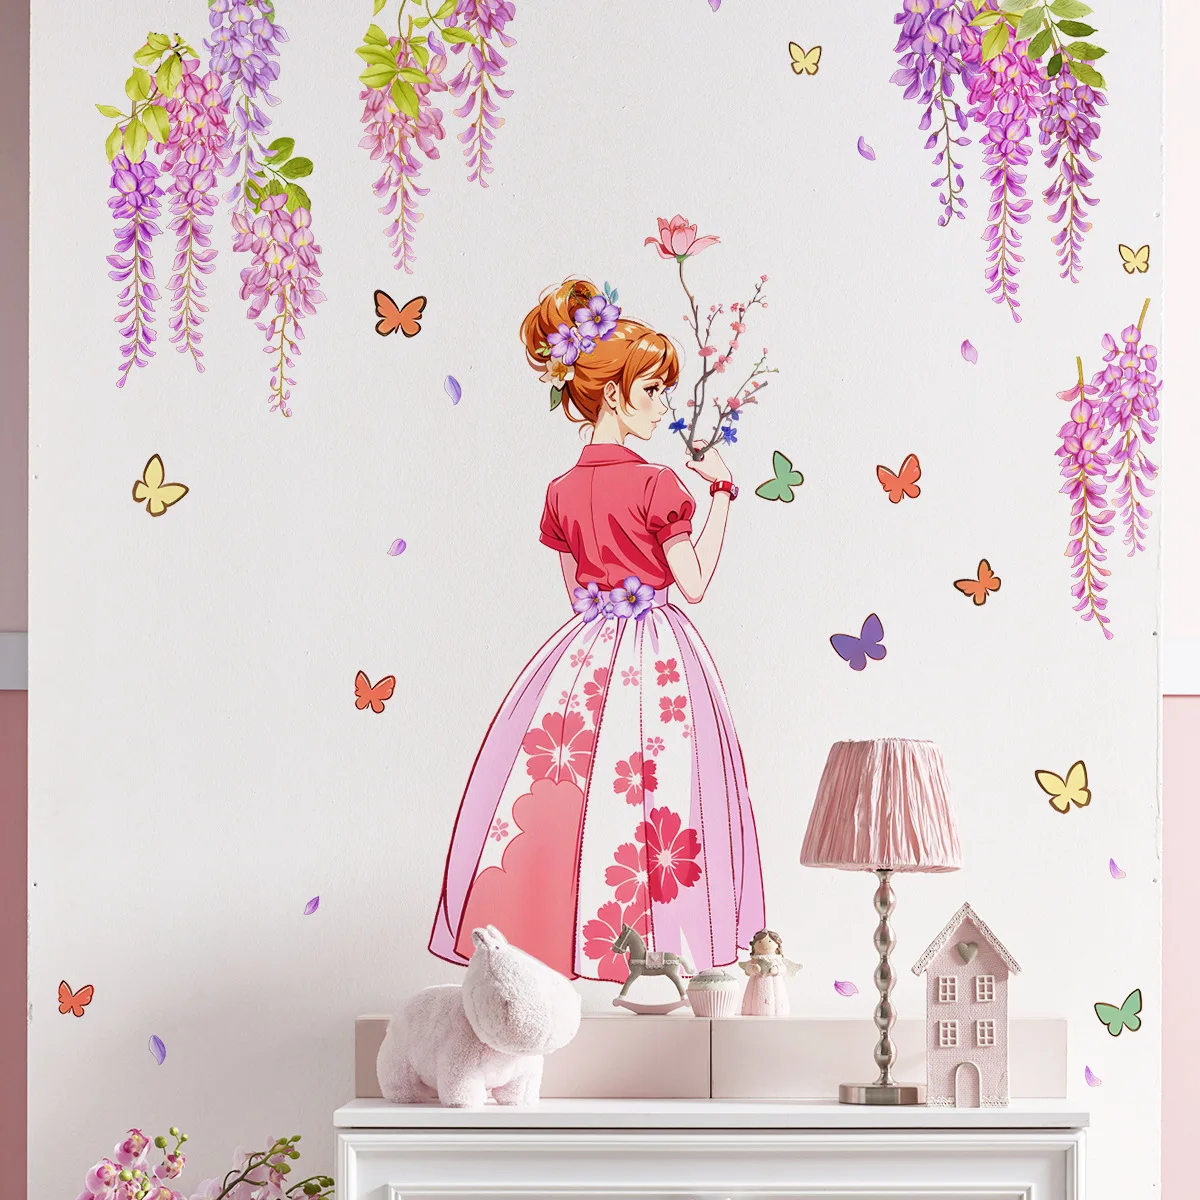 2pcs Plant Vine Girl Butterfly Wall Stickers Living Room Bedroom Background Wall Home Decorative Wall Stickers Wallpaper Ms3032 baby boy girl s room colorful star wallpaper cartoon stars bedroom wallpapers self adhesive pvc wall paper for kids rooms qz167